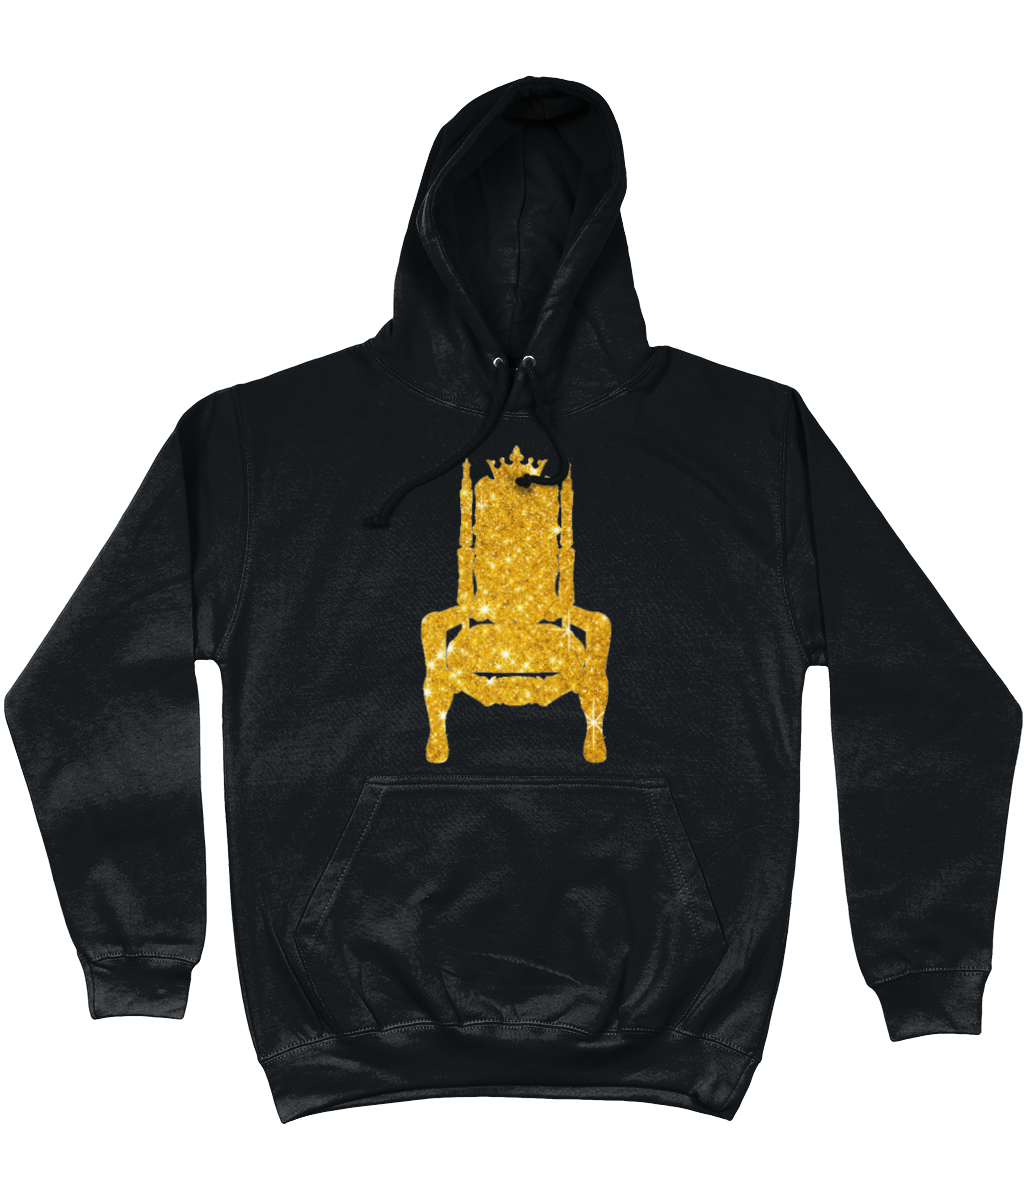 'On Top Of My Game' Special Edition Gold Glitter Pattern Hoodie (Black Smoke)